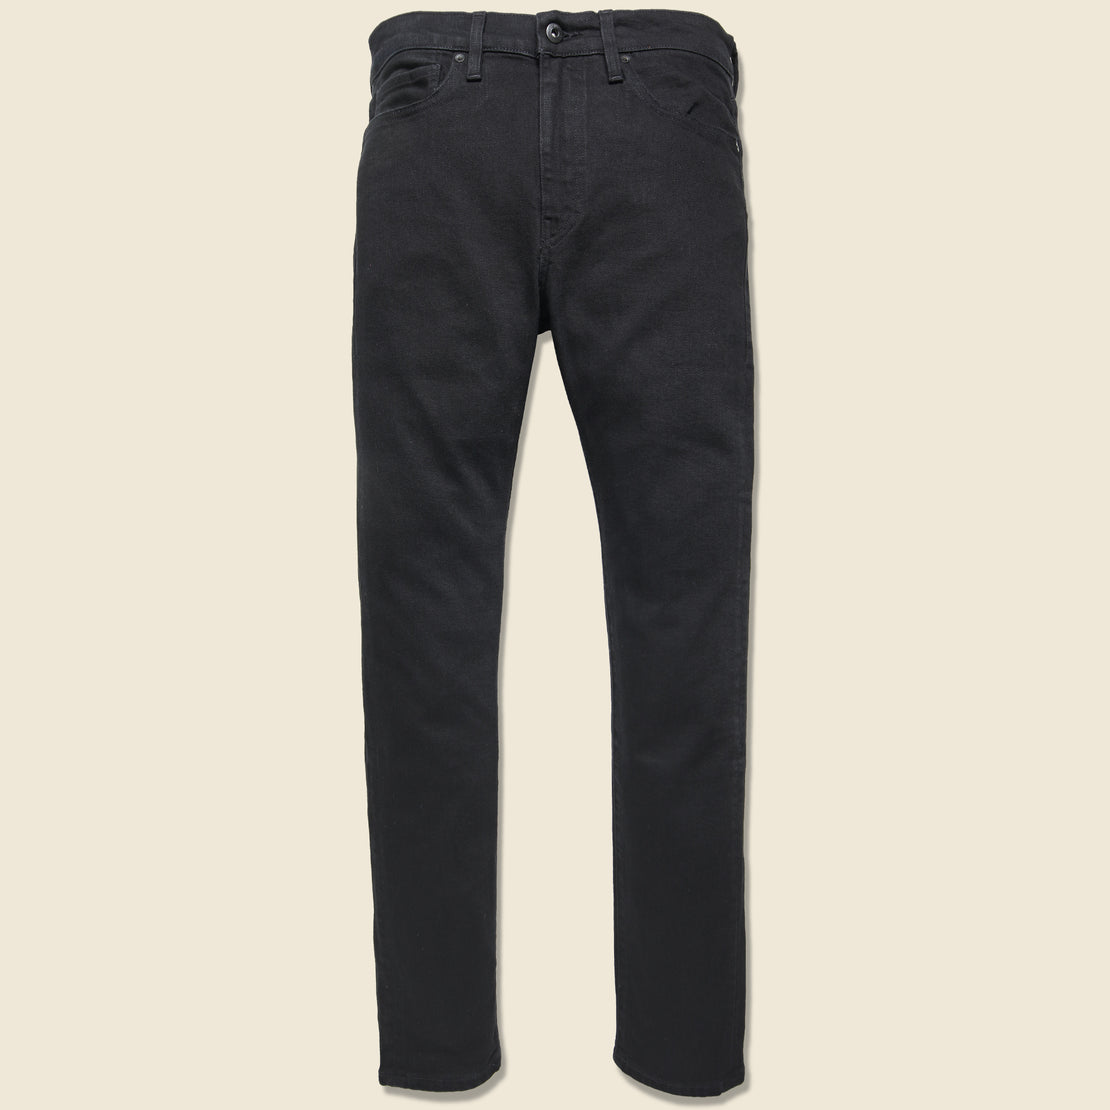 Levis Made & Crafted 510 Jean - Black Rinse